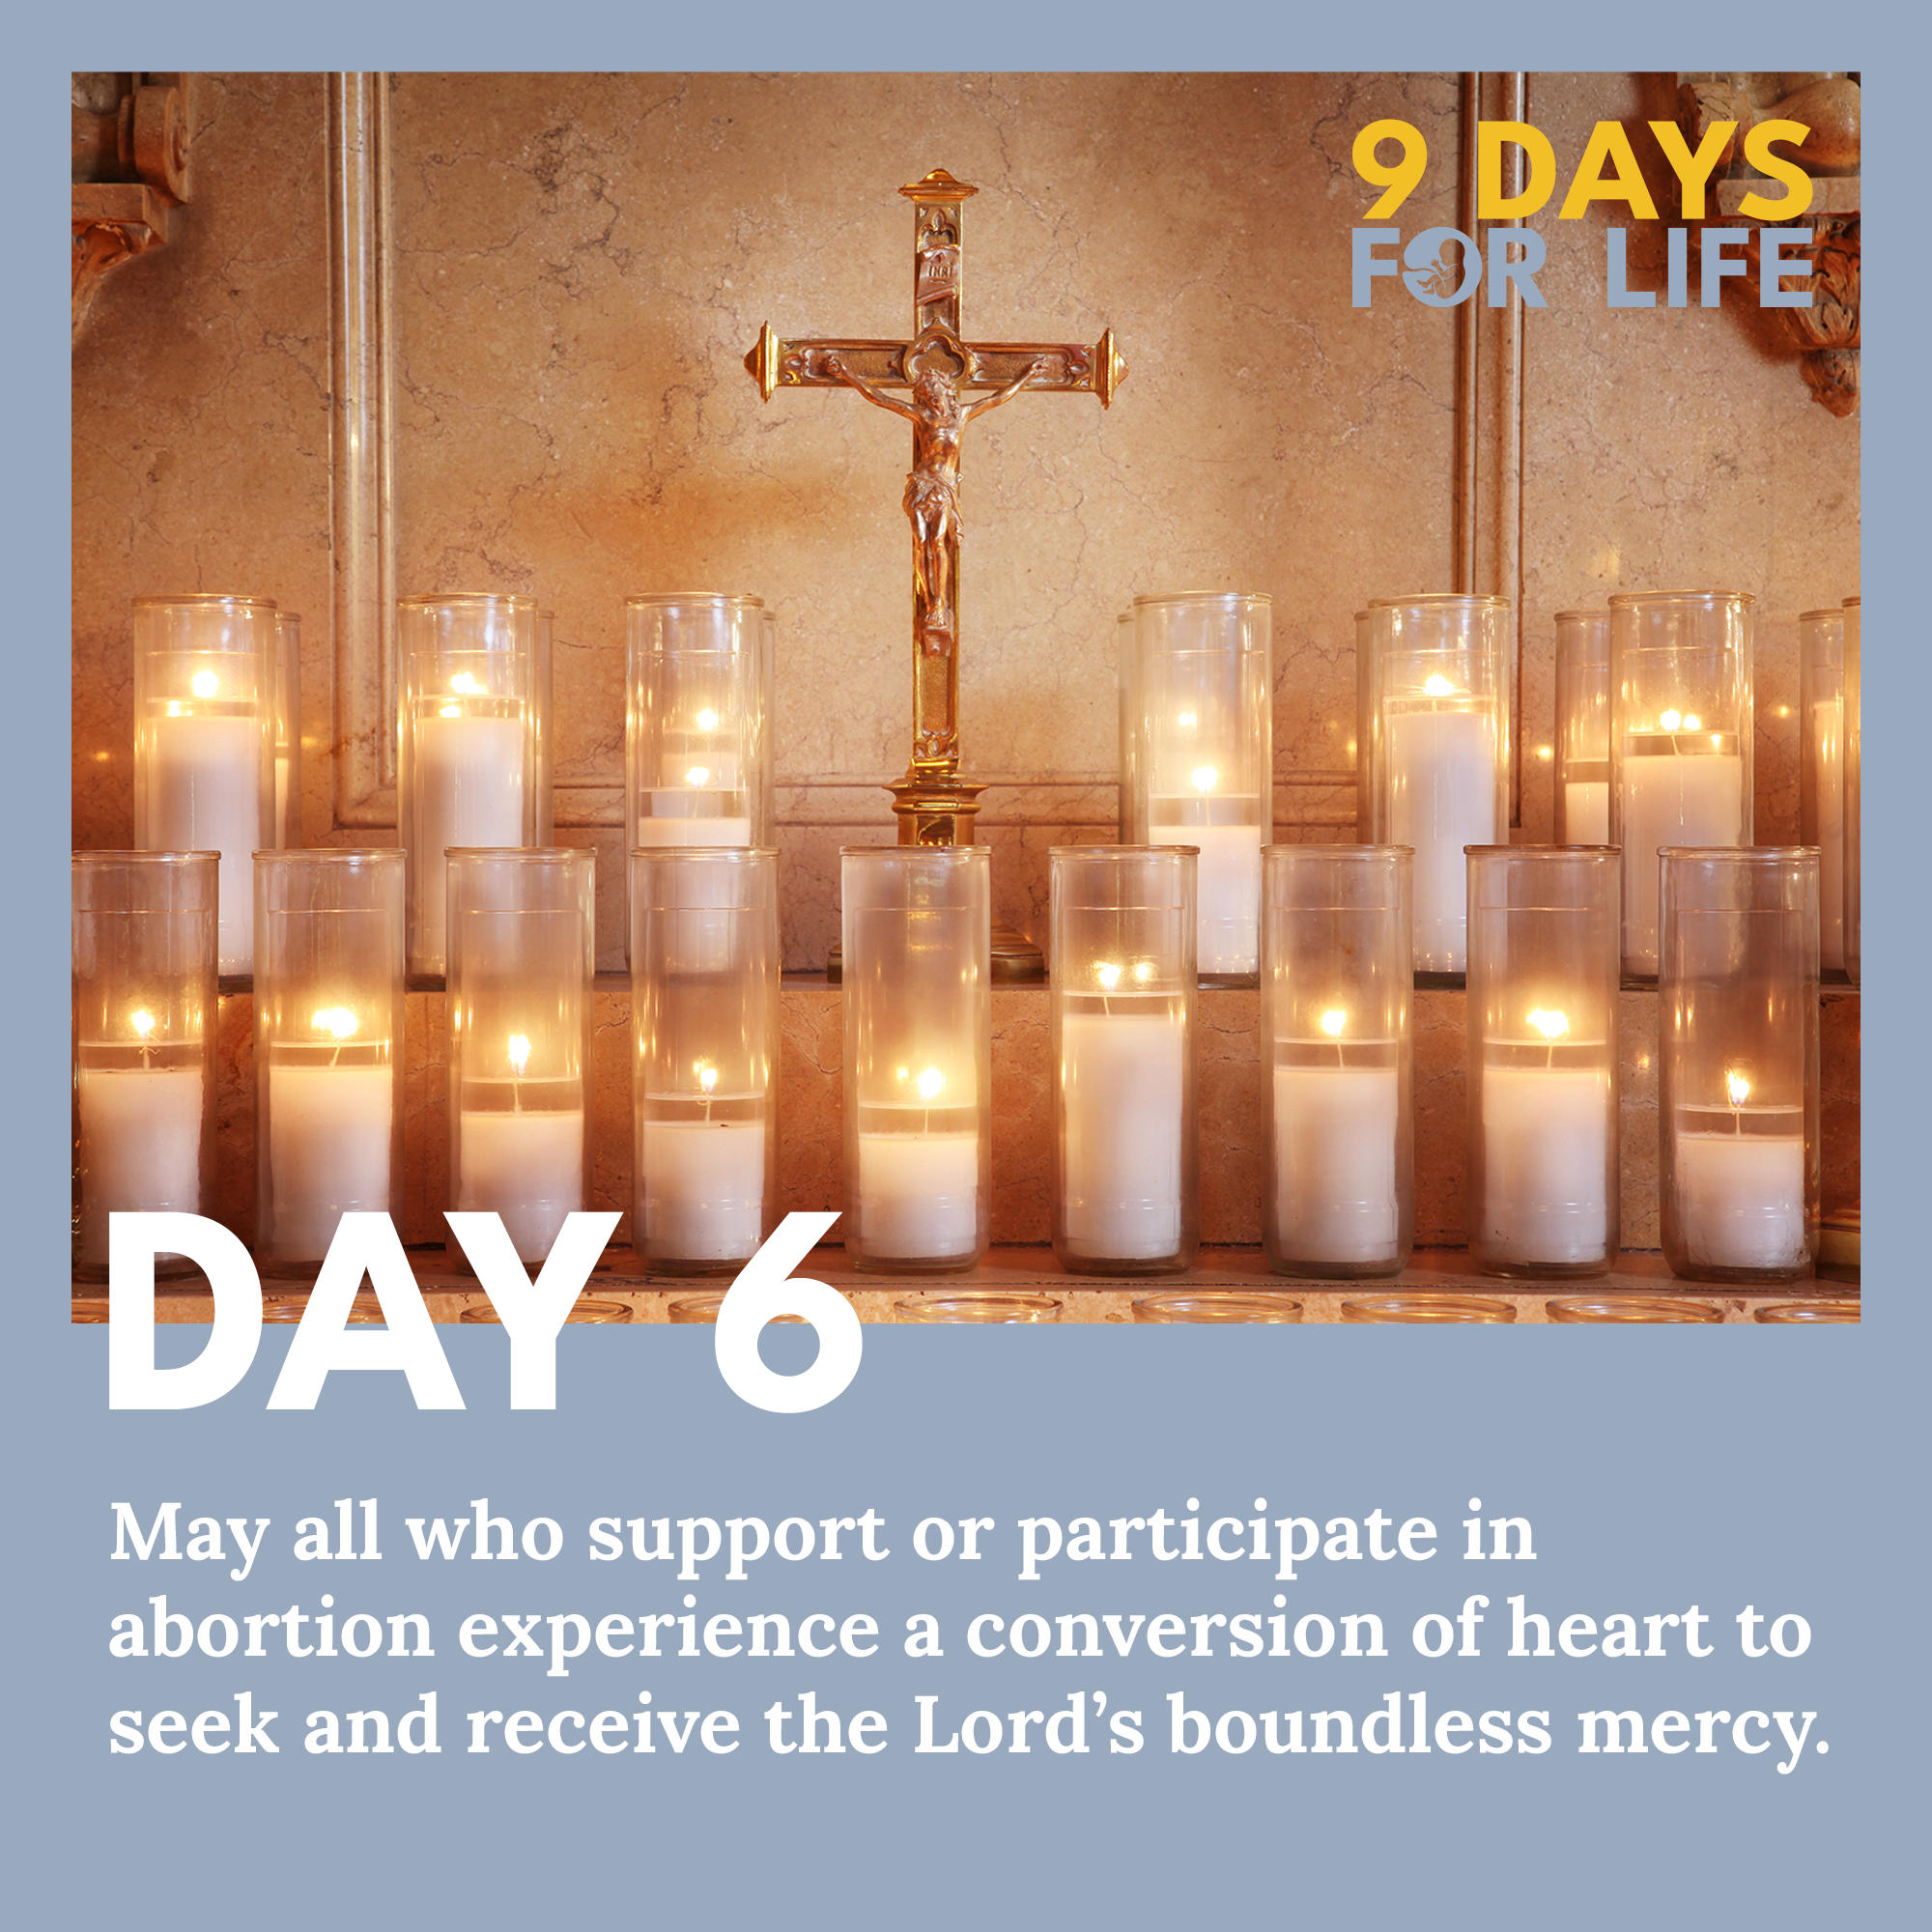 Day 6 - Nine Days for Life - Candles with crucifix in the center.